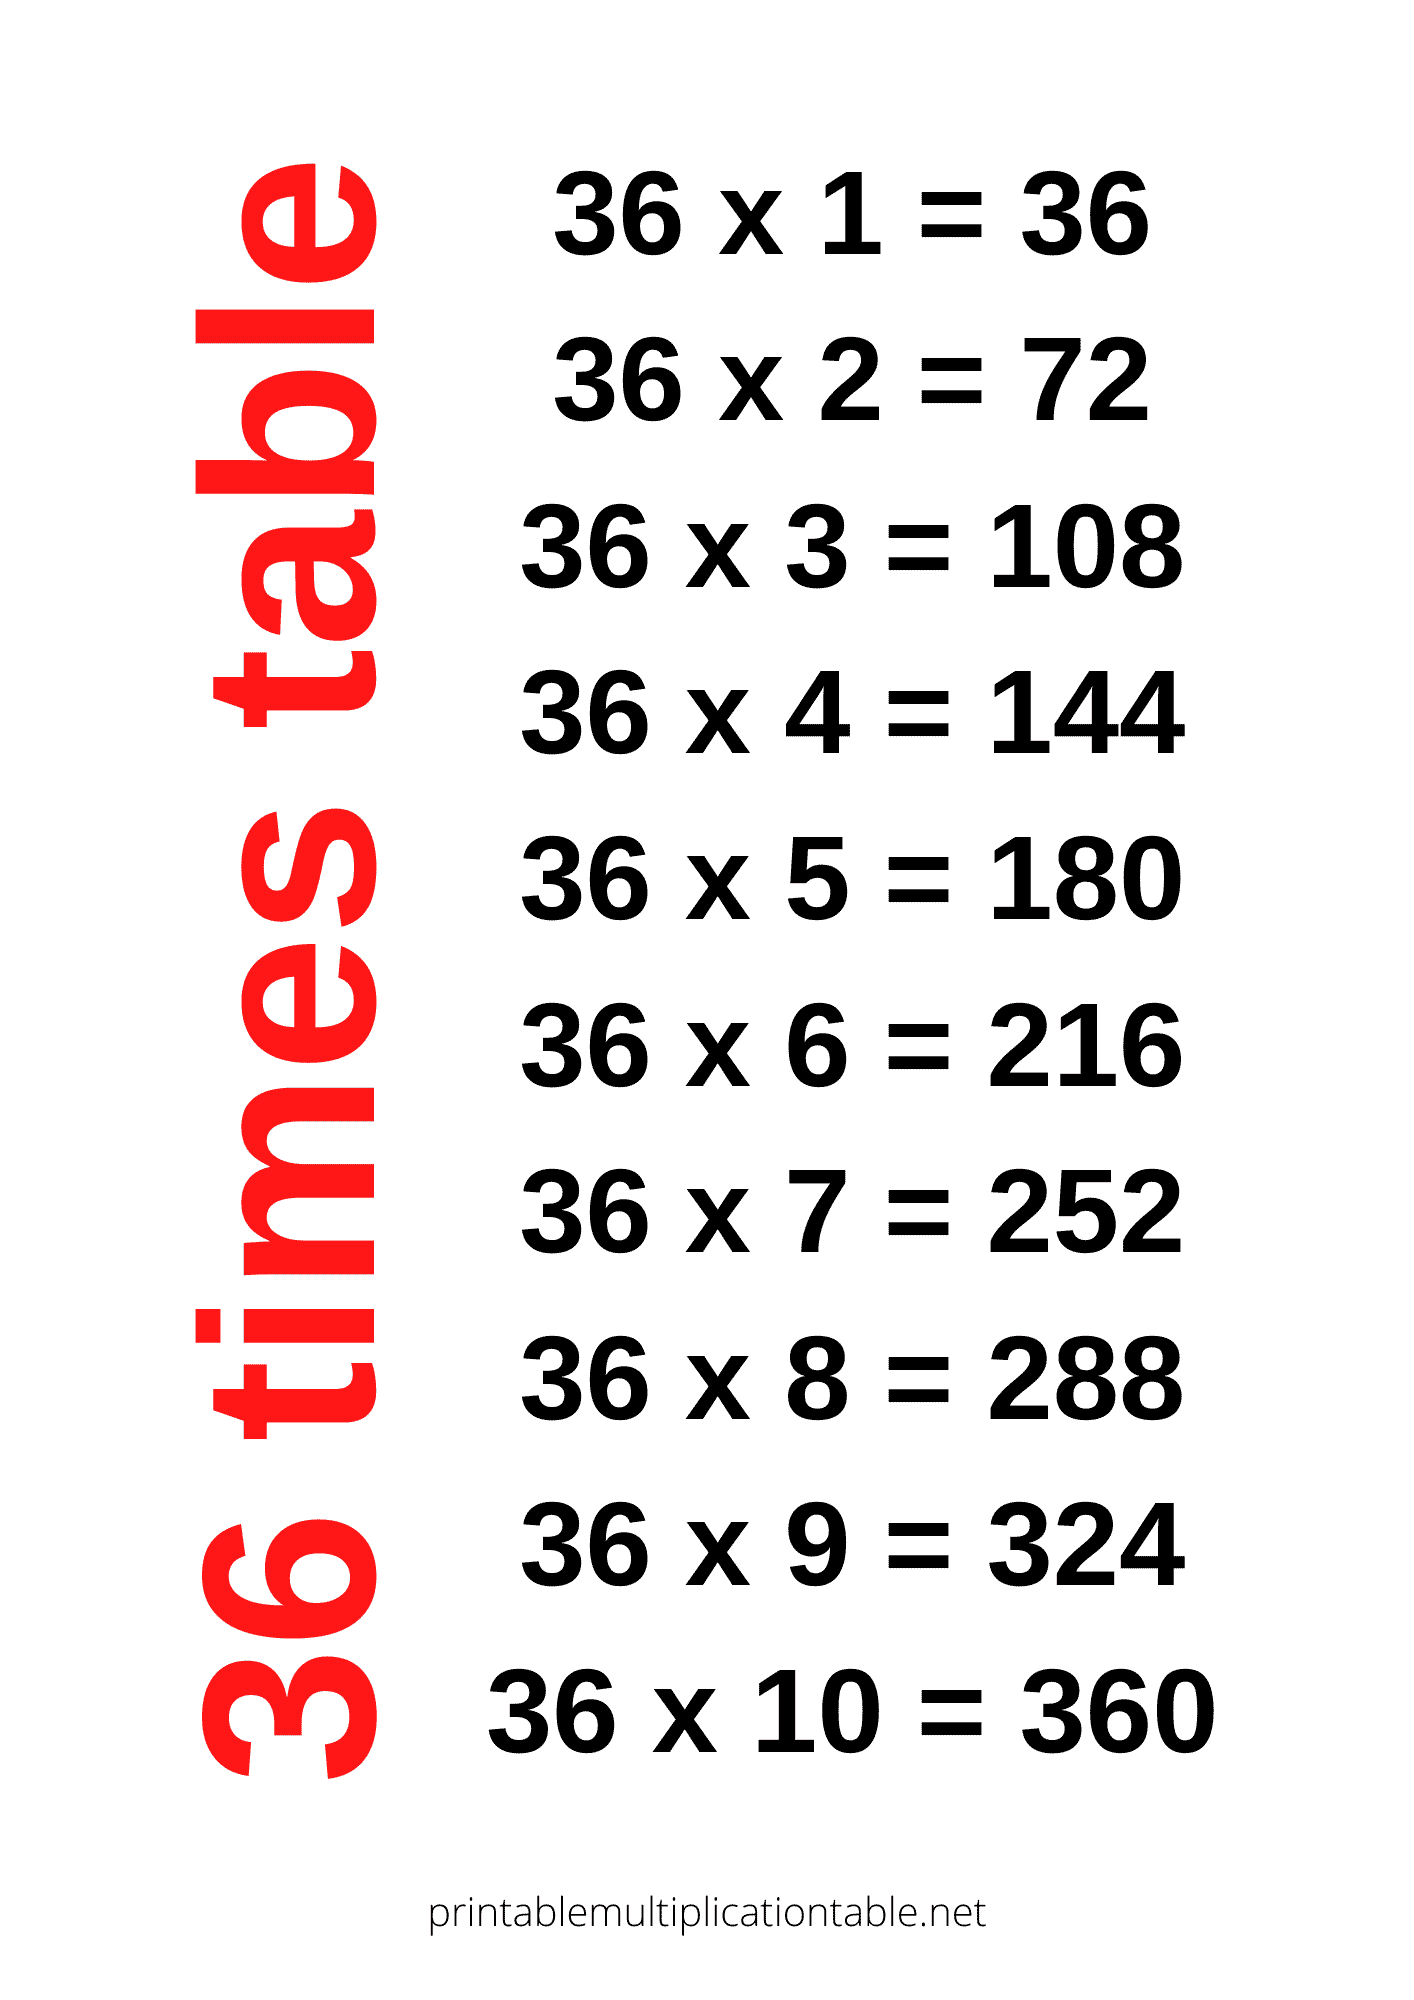 36 times table chart